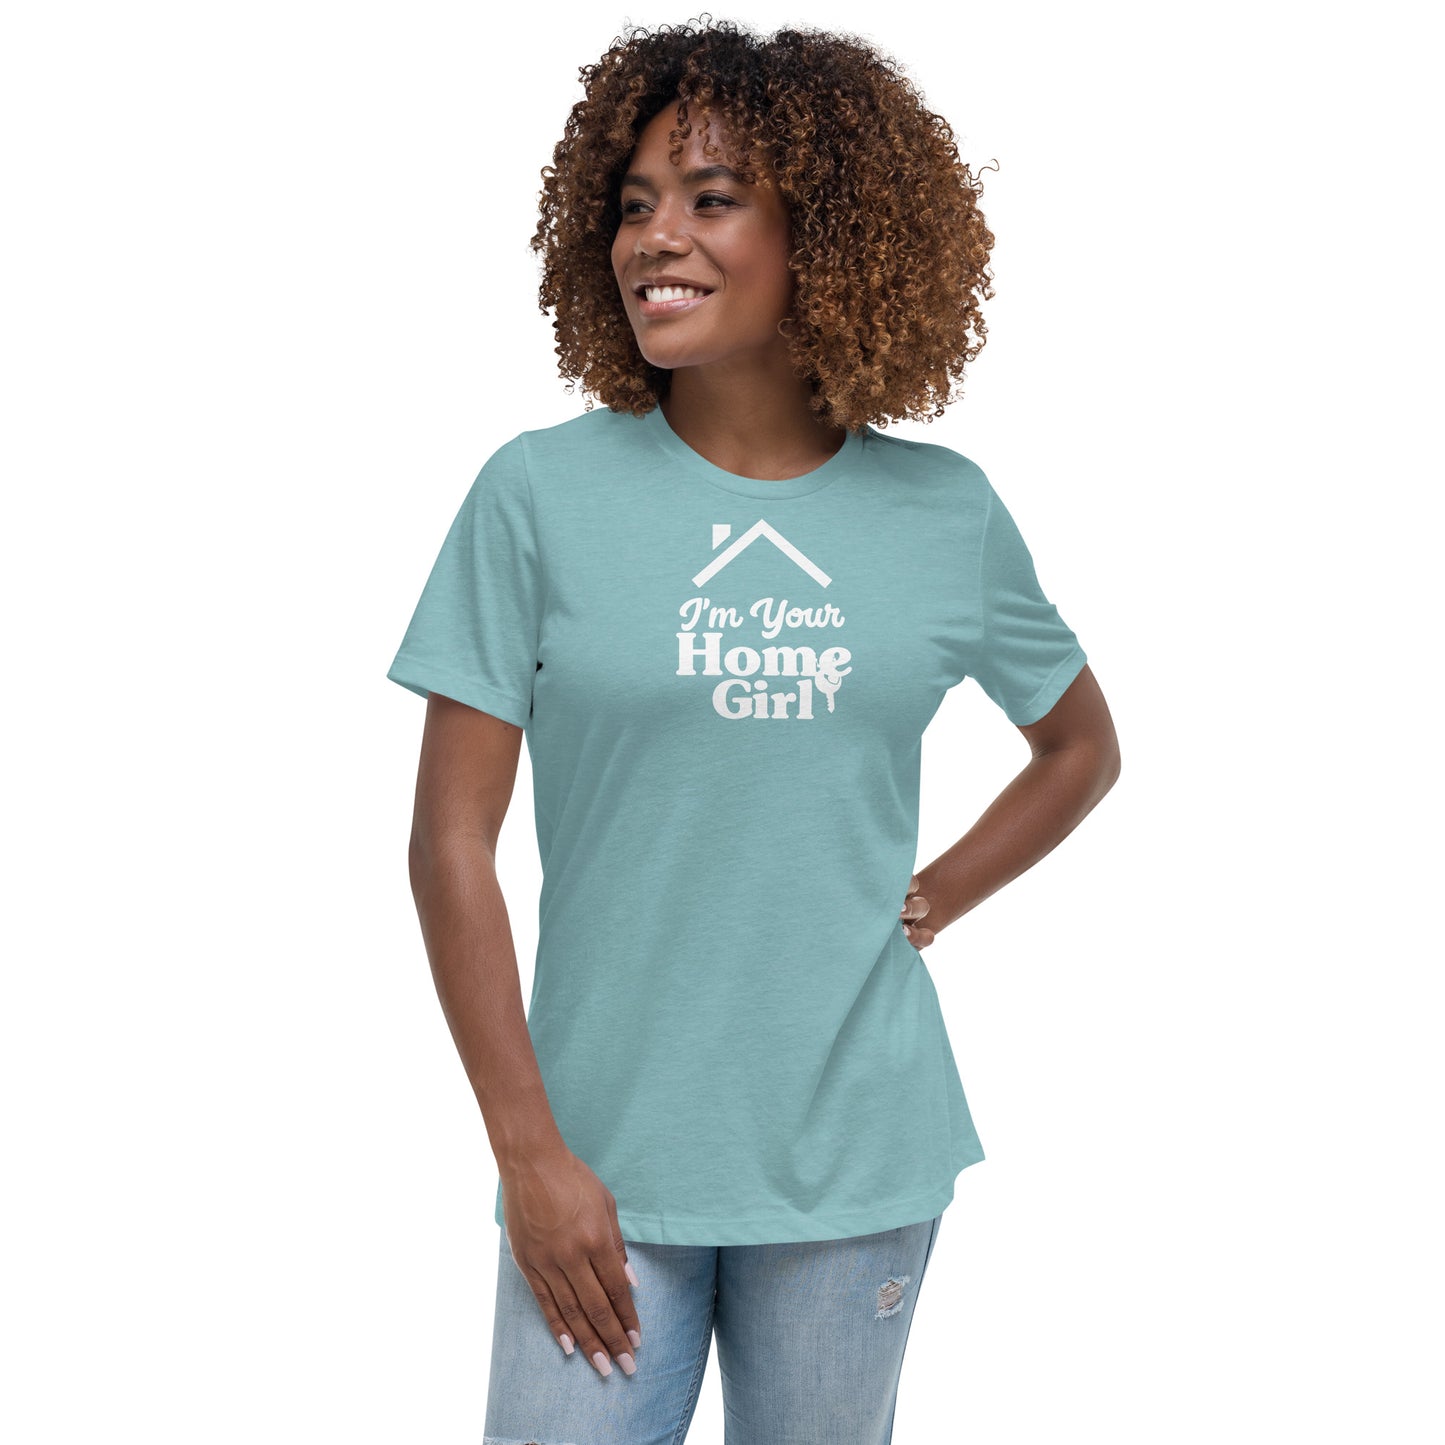 Women's Relaxed T-Shirt "I'm your home girl"